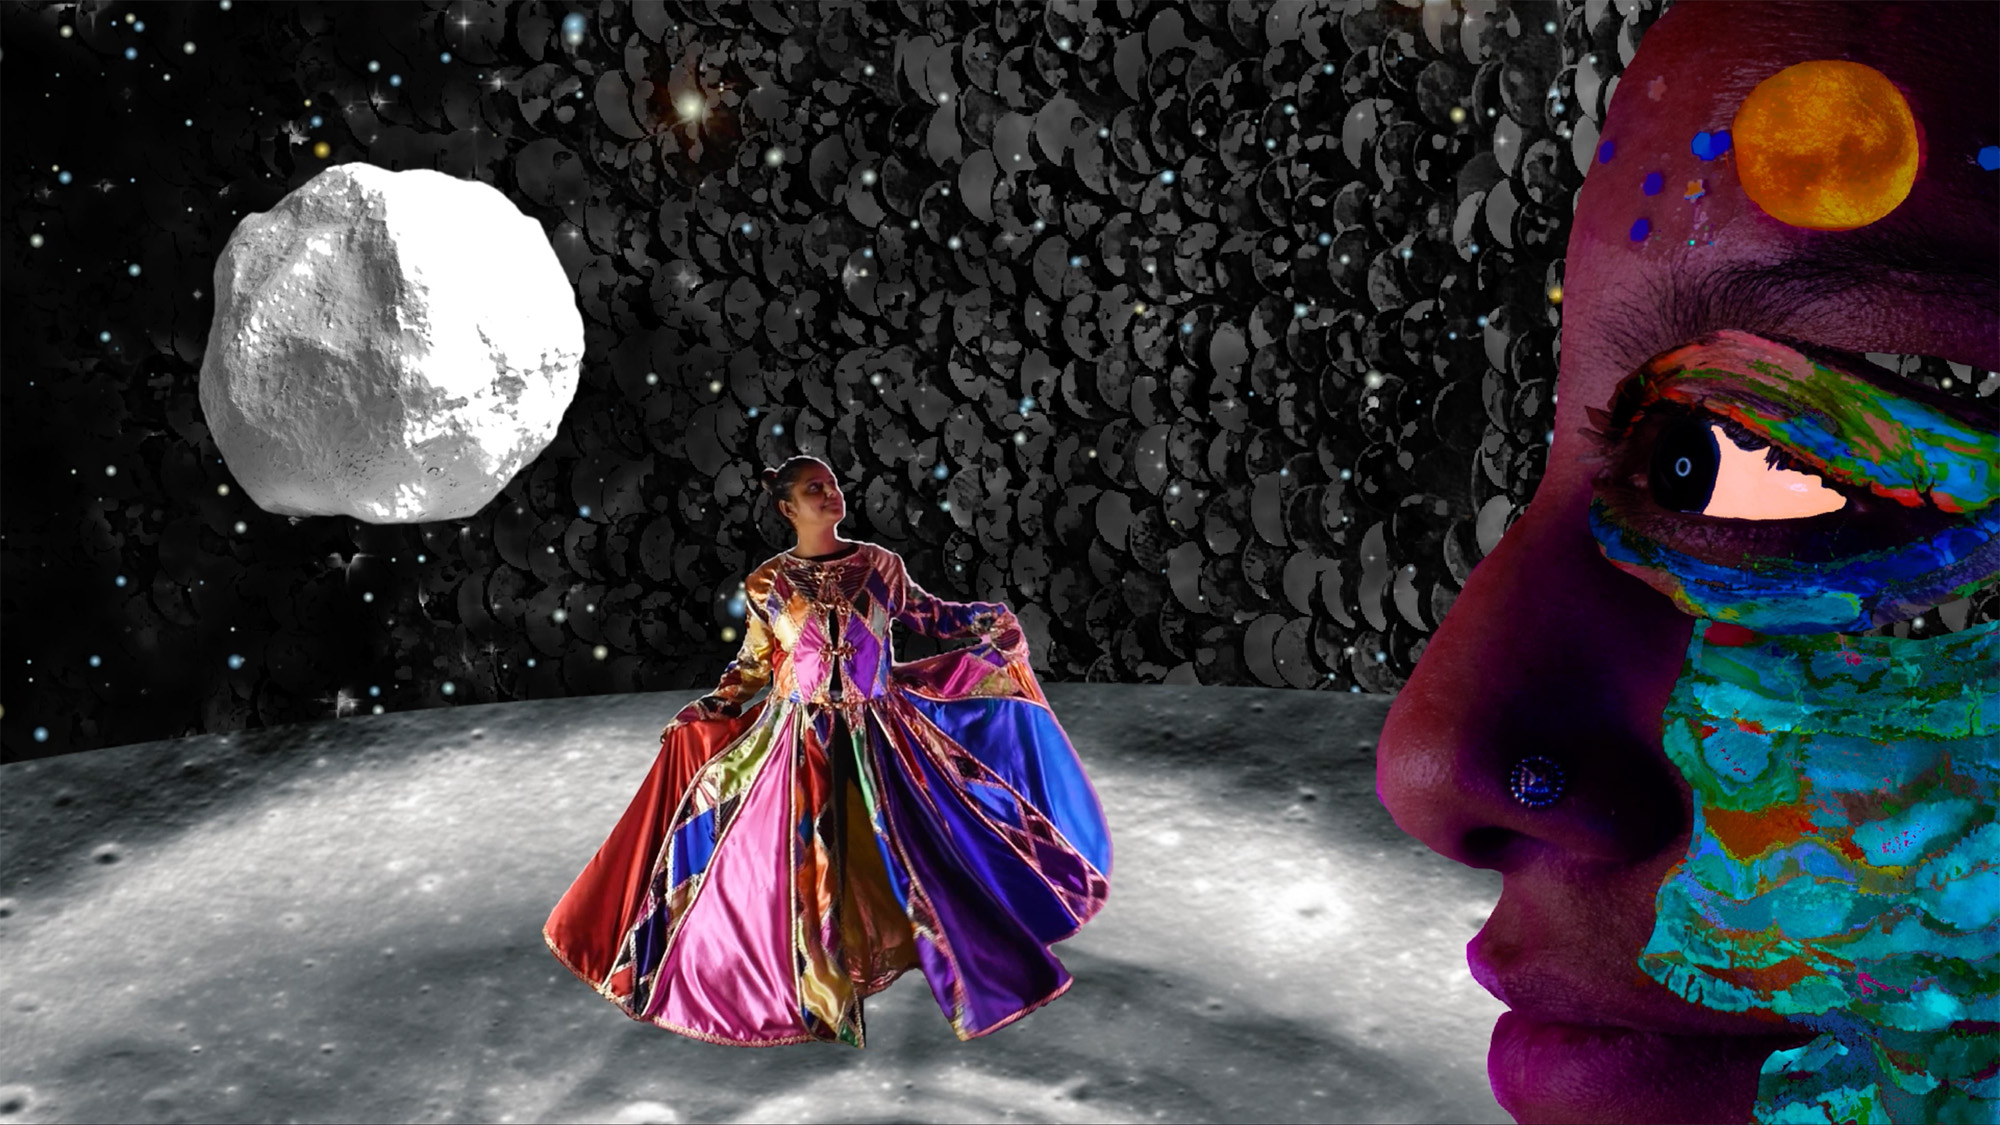 Collage still with person wearing multicolored dress on moon-like surface, with floating white object, black sequins, and a colorful face in profile.